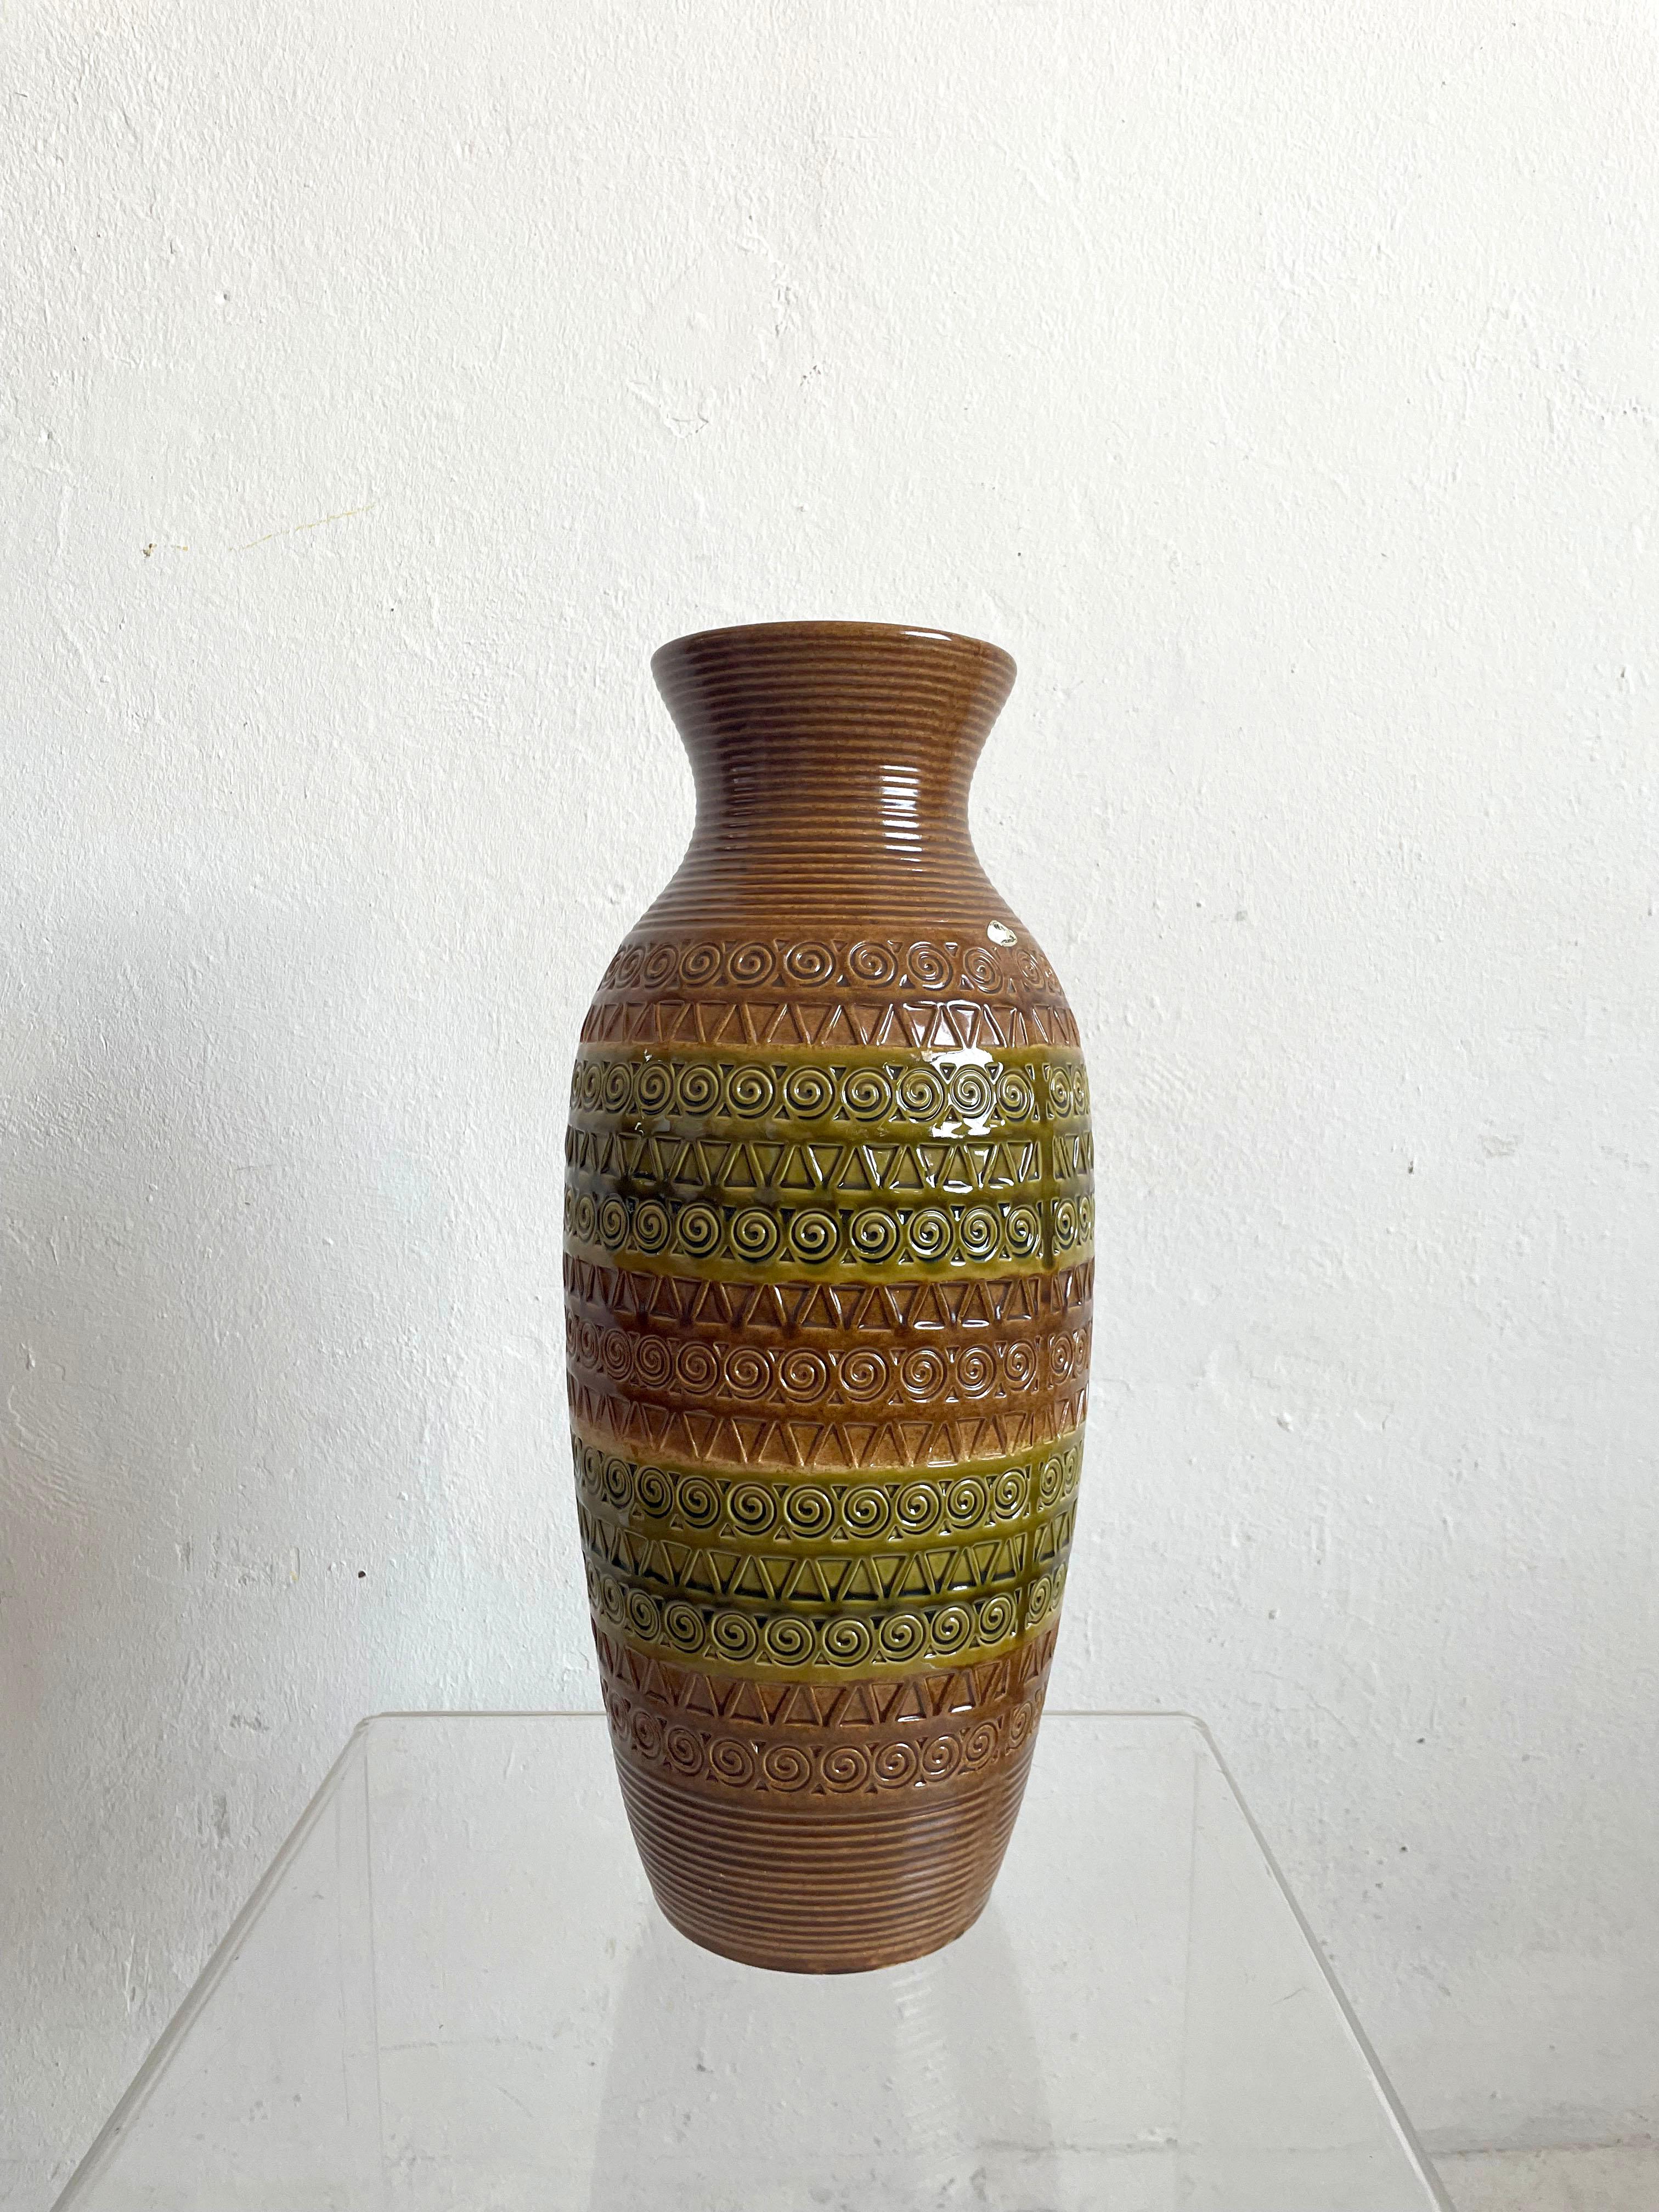 Very large mid-century glazed German pottery floor vase with beautiful incised decoration in the style of Bitossi

Manufactured in Germany (Scheurich Keramik)

Marked at the bottom 1142/50

50.5 cm in height and 4.20 kg in weight

The vase